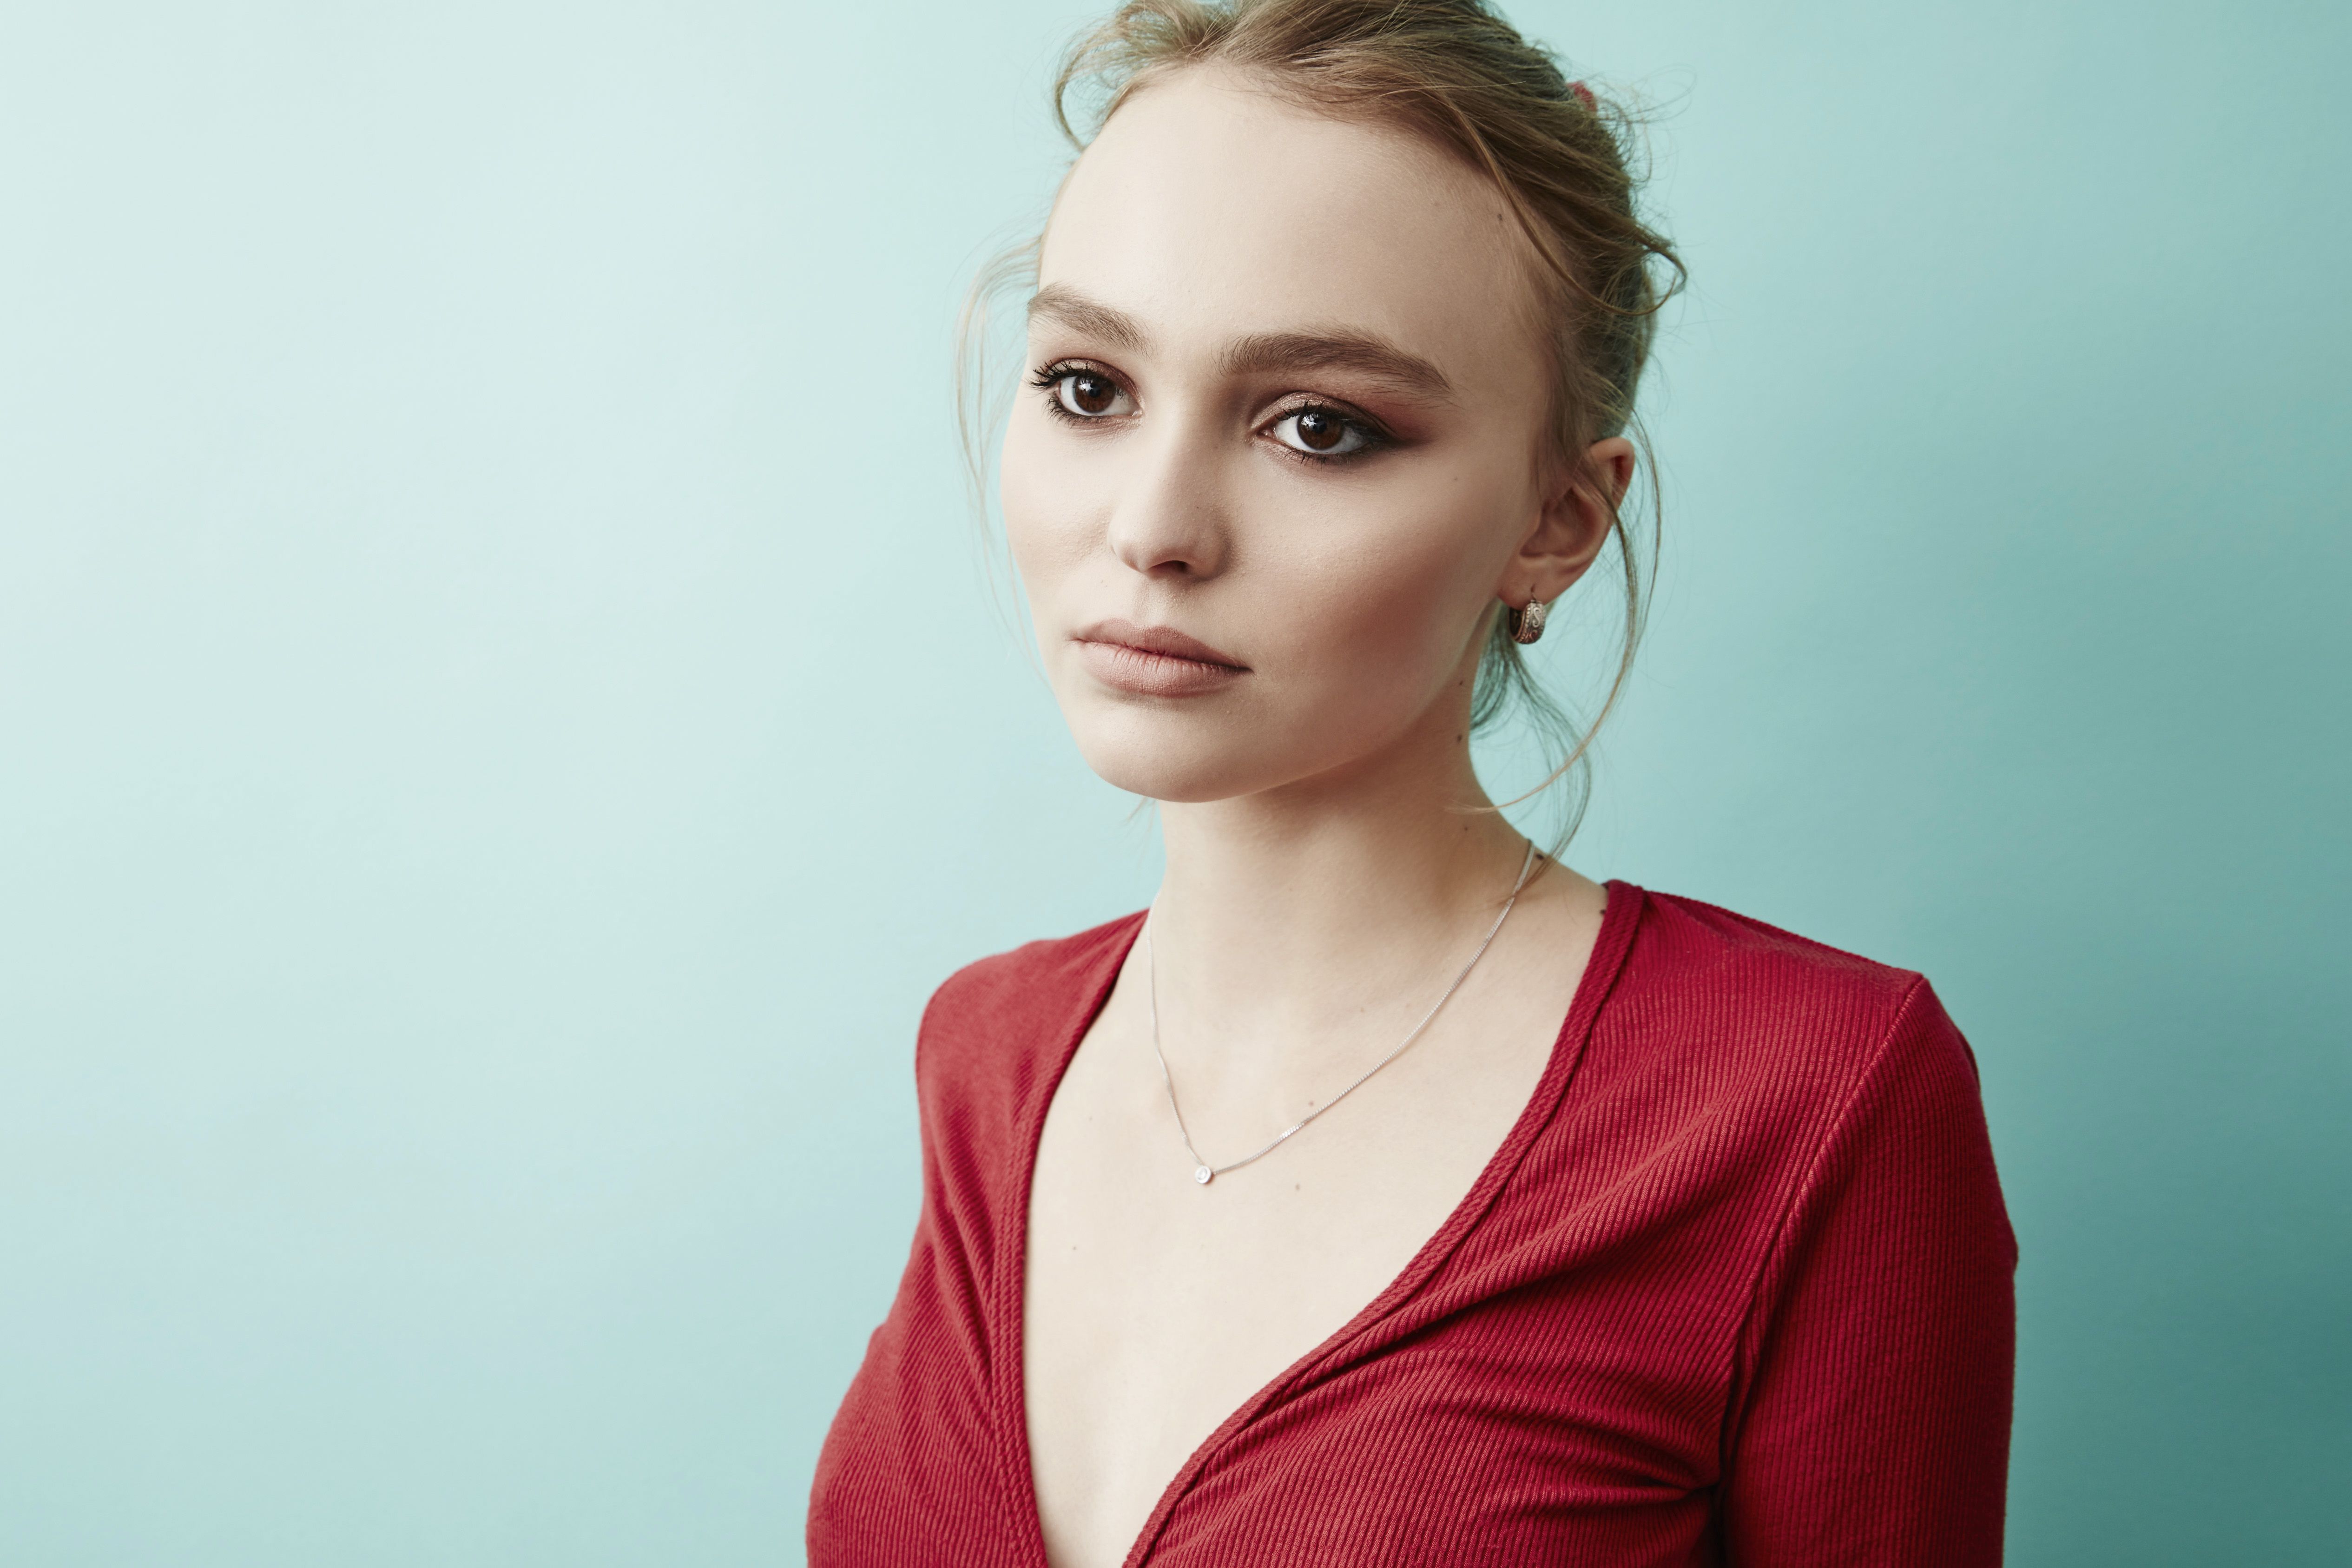 Lily Rose Depp is the face of Chanel's new No.5 L'Eau